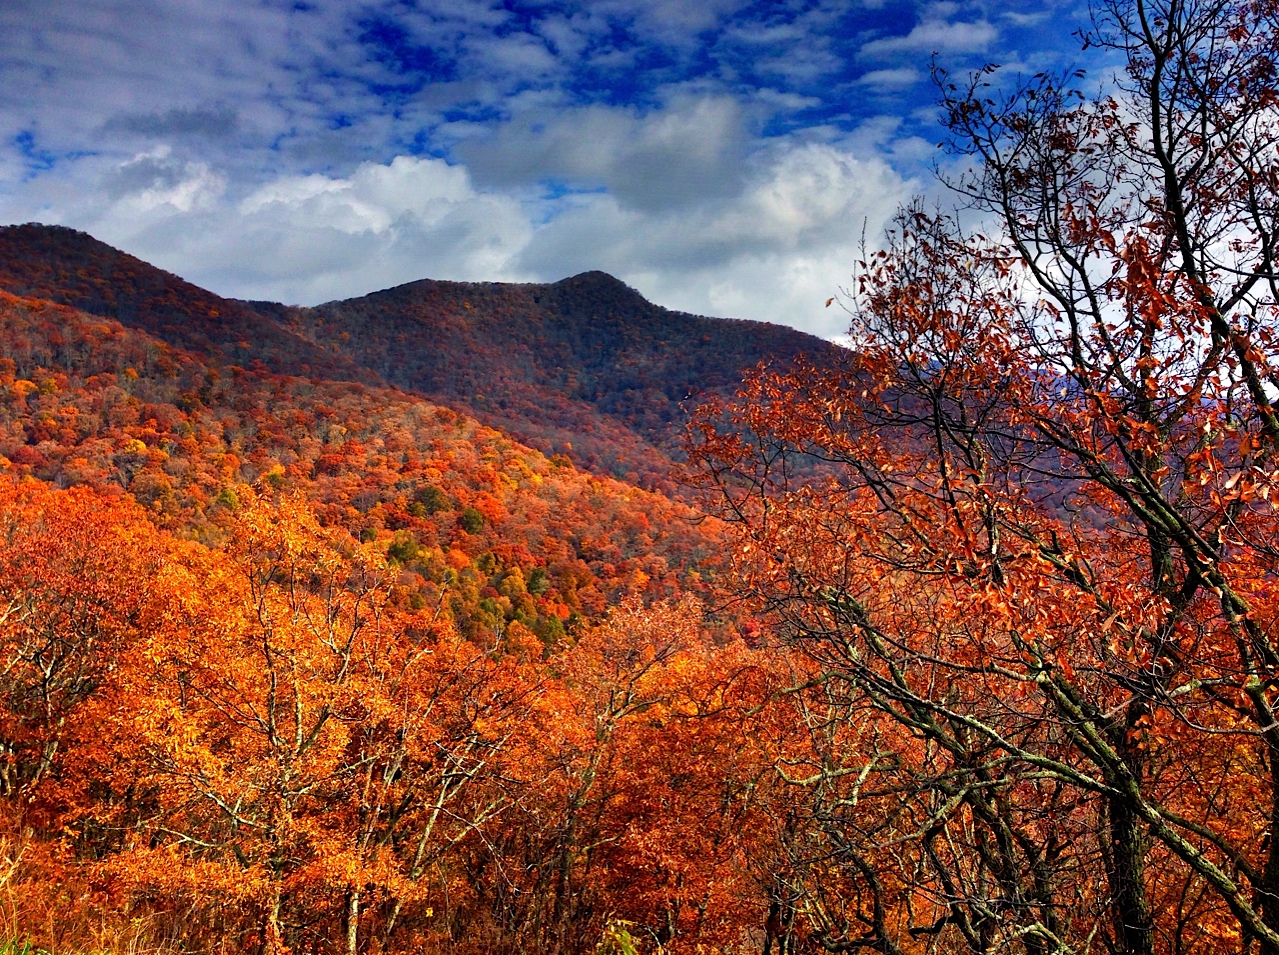 Colorful autumn leaves in the mountains.